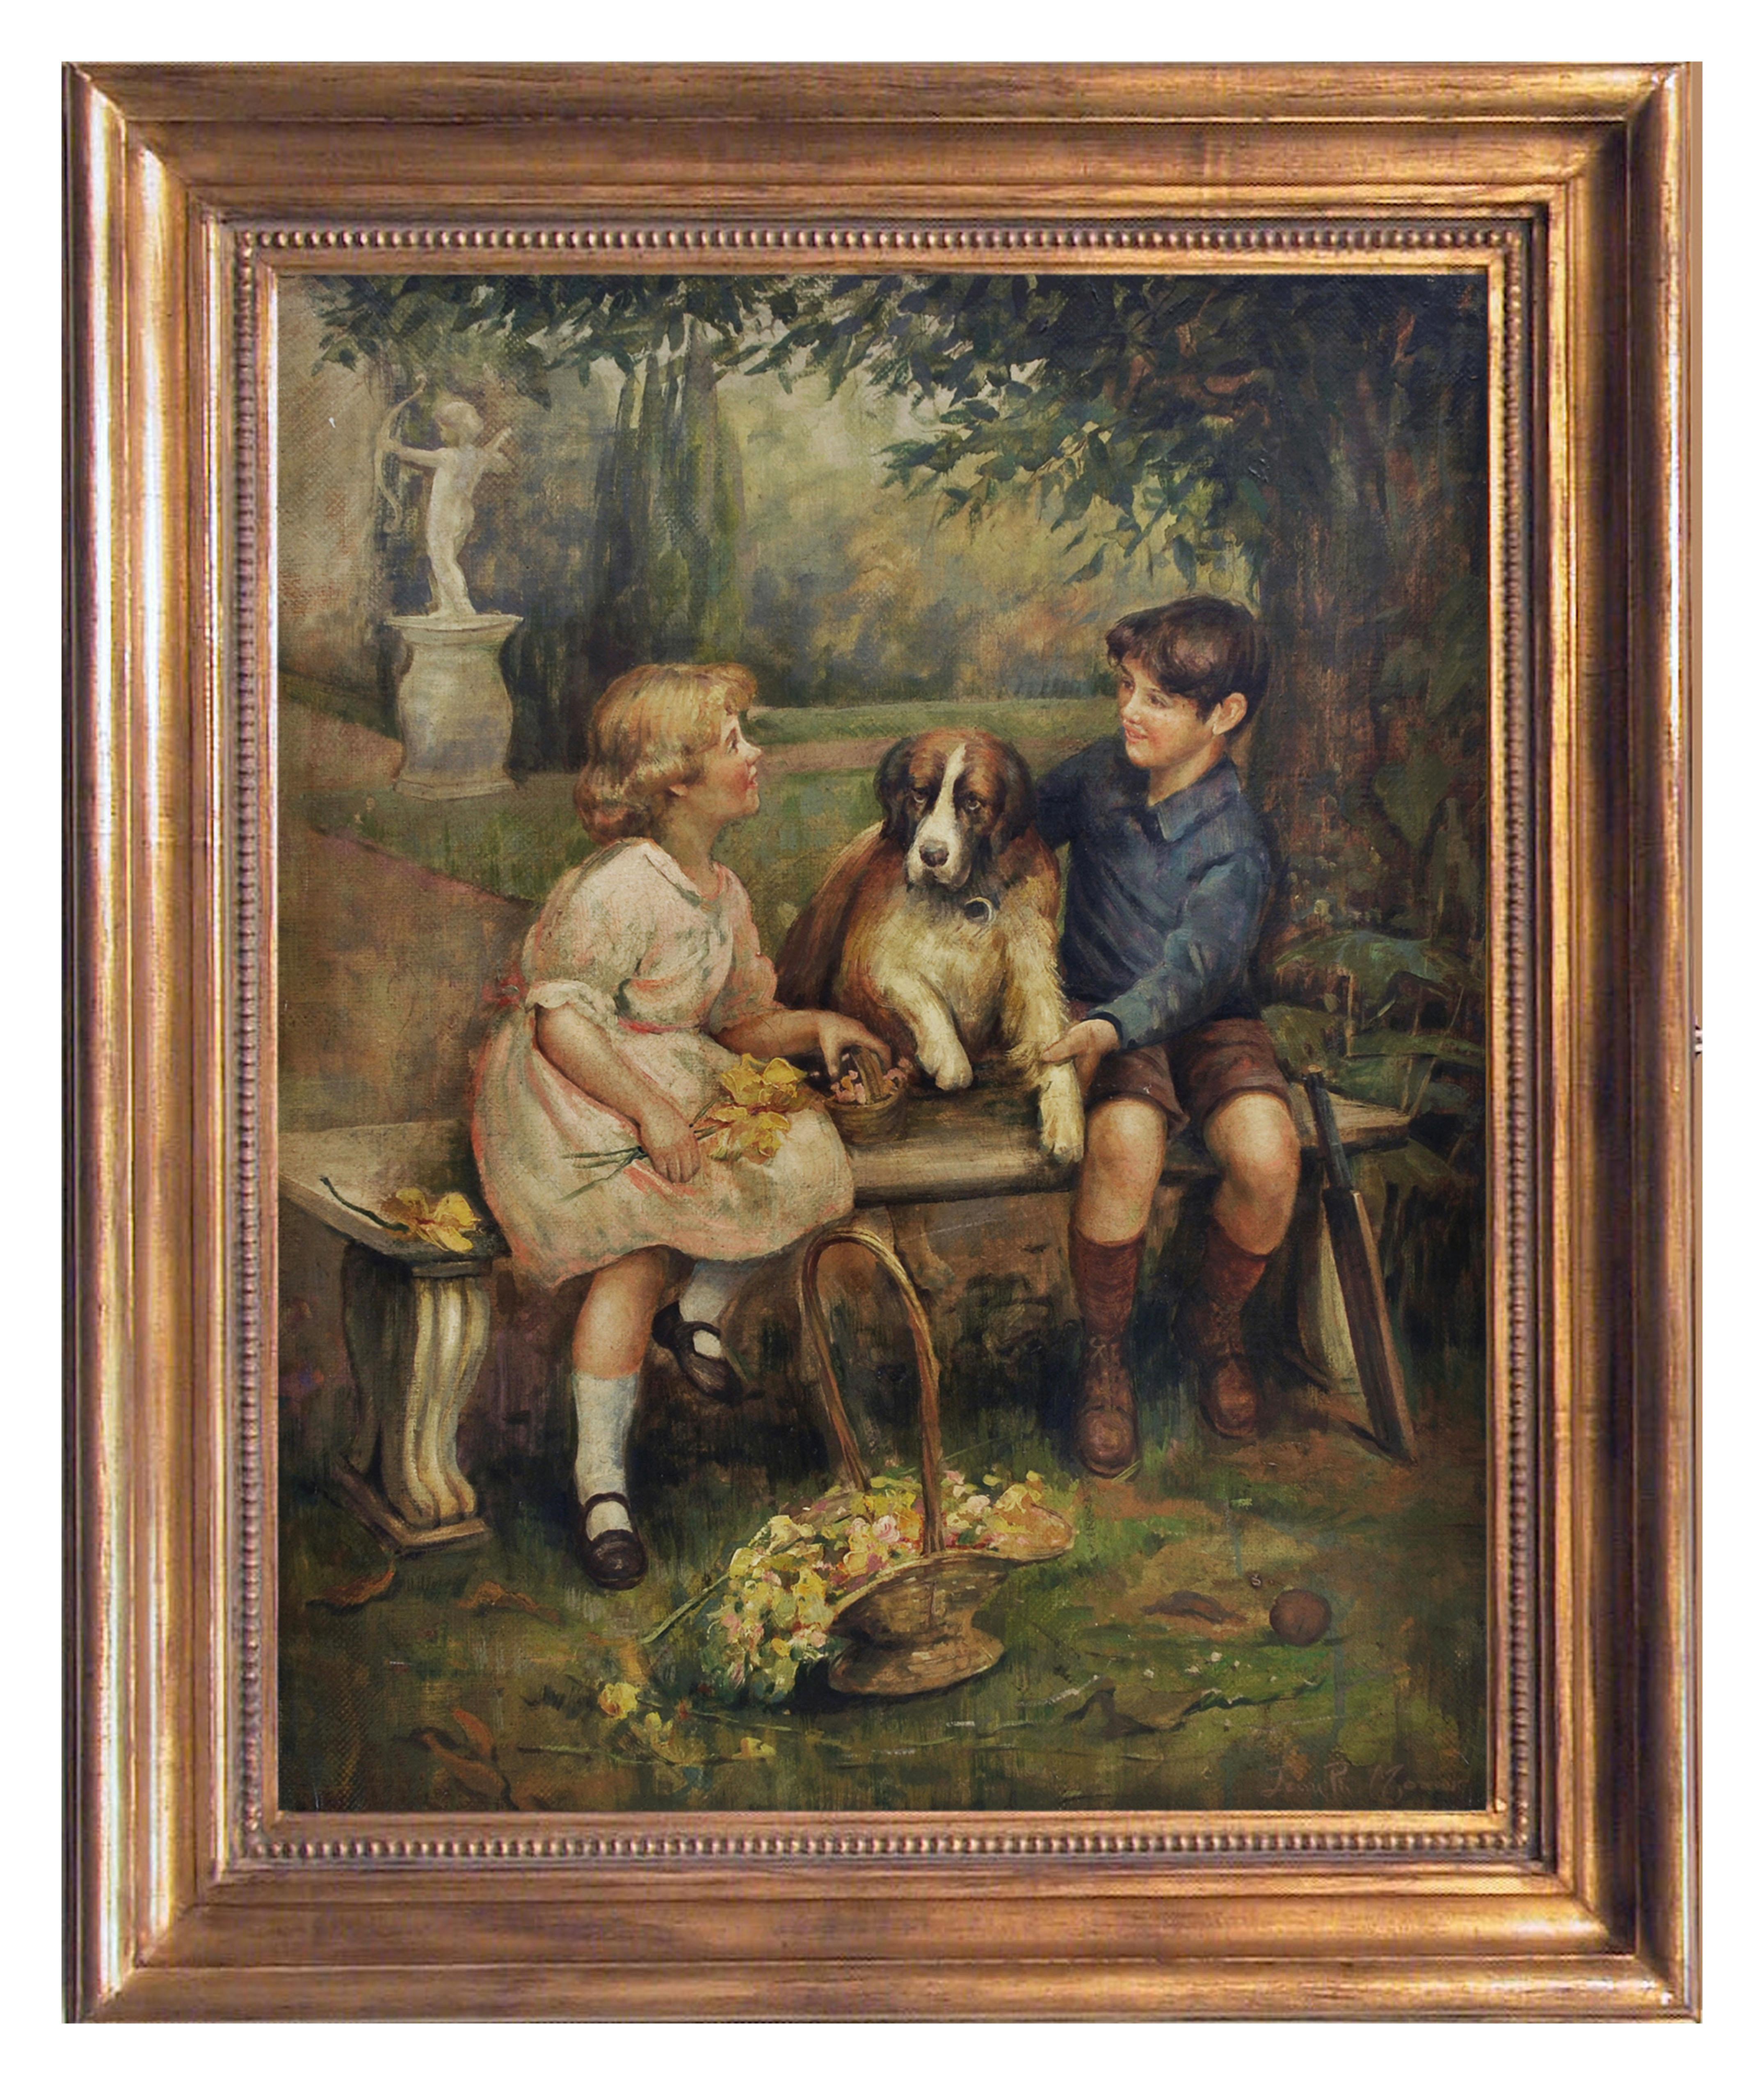 CHILDREN WITH DOG - English School - Italian Figurative Oil on canvas Painting